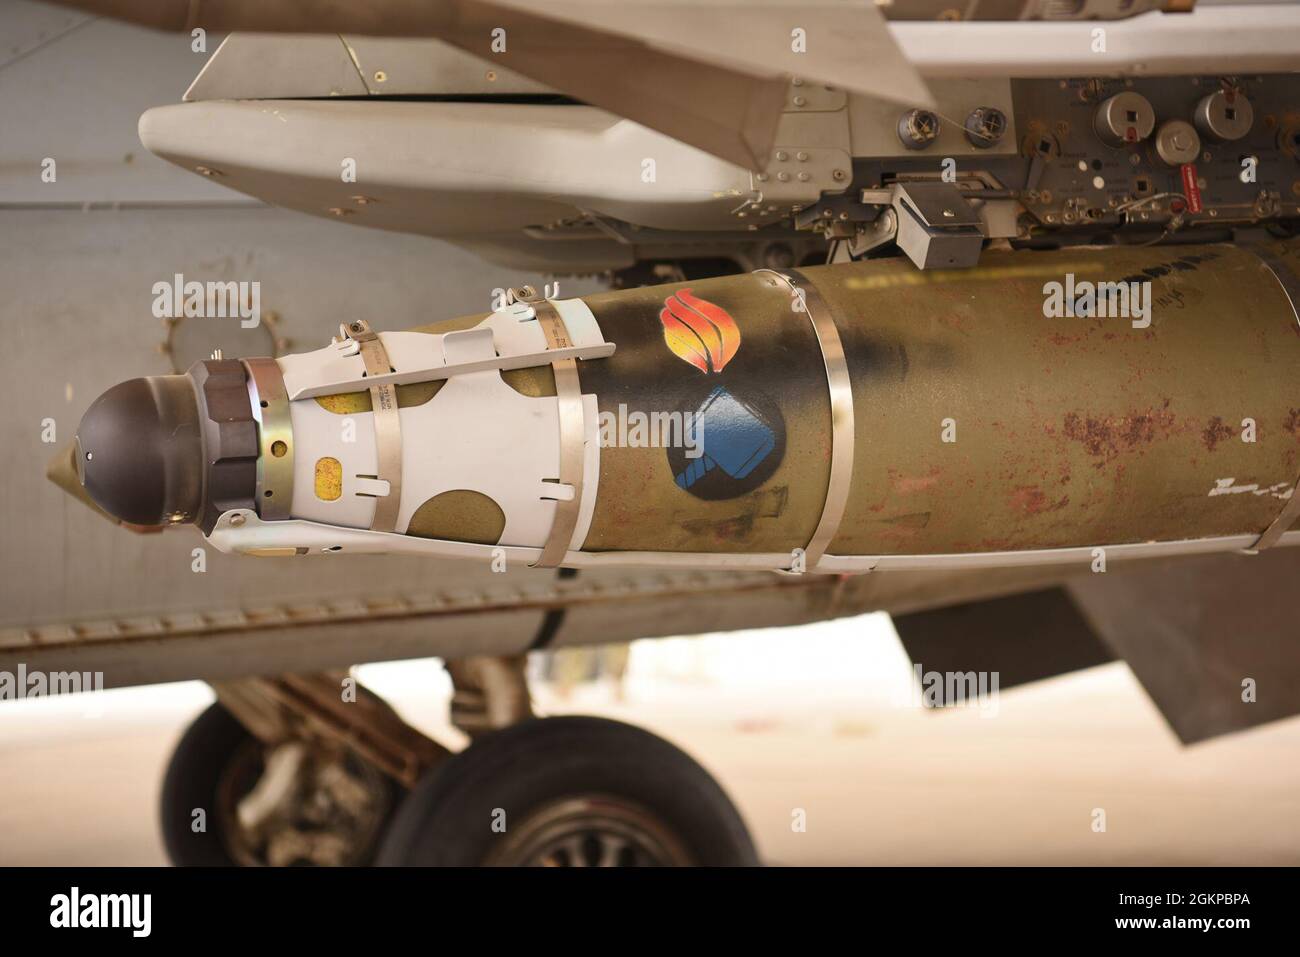 A stylized bomb graphic painted onto a GBU-54 bomb by members of the 378th Expeditionary Maintenance Squadron ammunition section, at Prince Sultan Air Base, Kingdom of Saudi Arabia, June 11, 2021. The 'Swamp Fox' Airmen from the South Carolina Air National Guard are deployed to PSAB to project combat power and help bolster defensive capabilities against potential threats in the region. Stock Photo